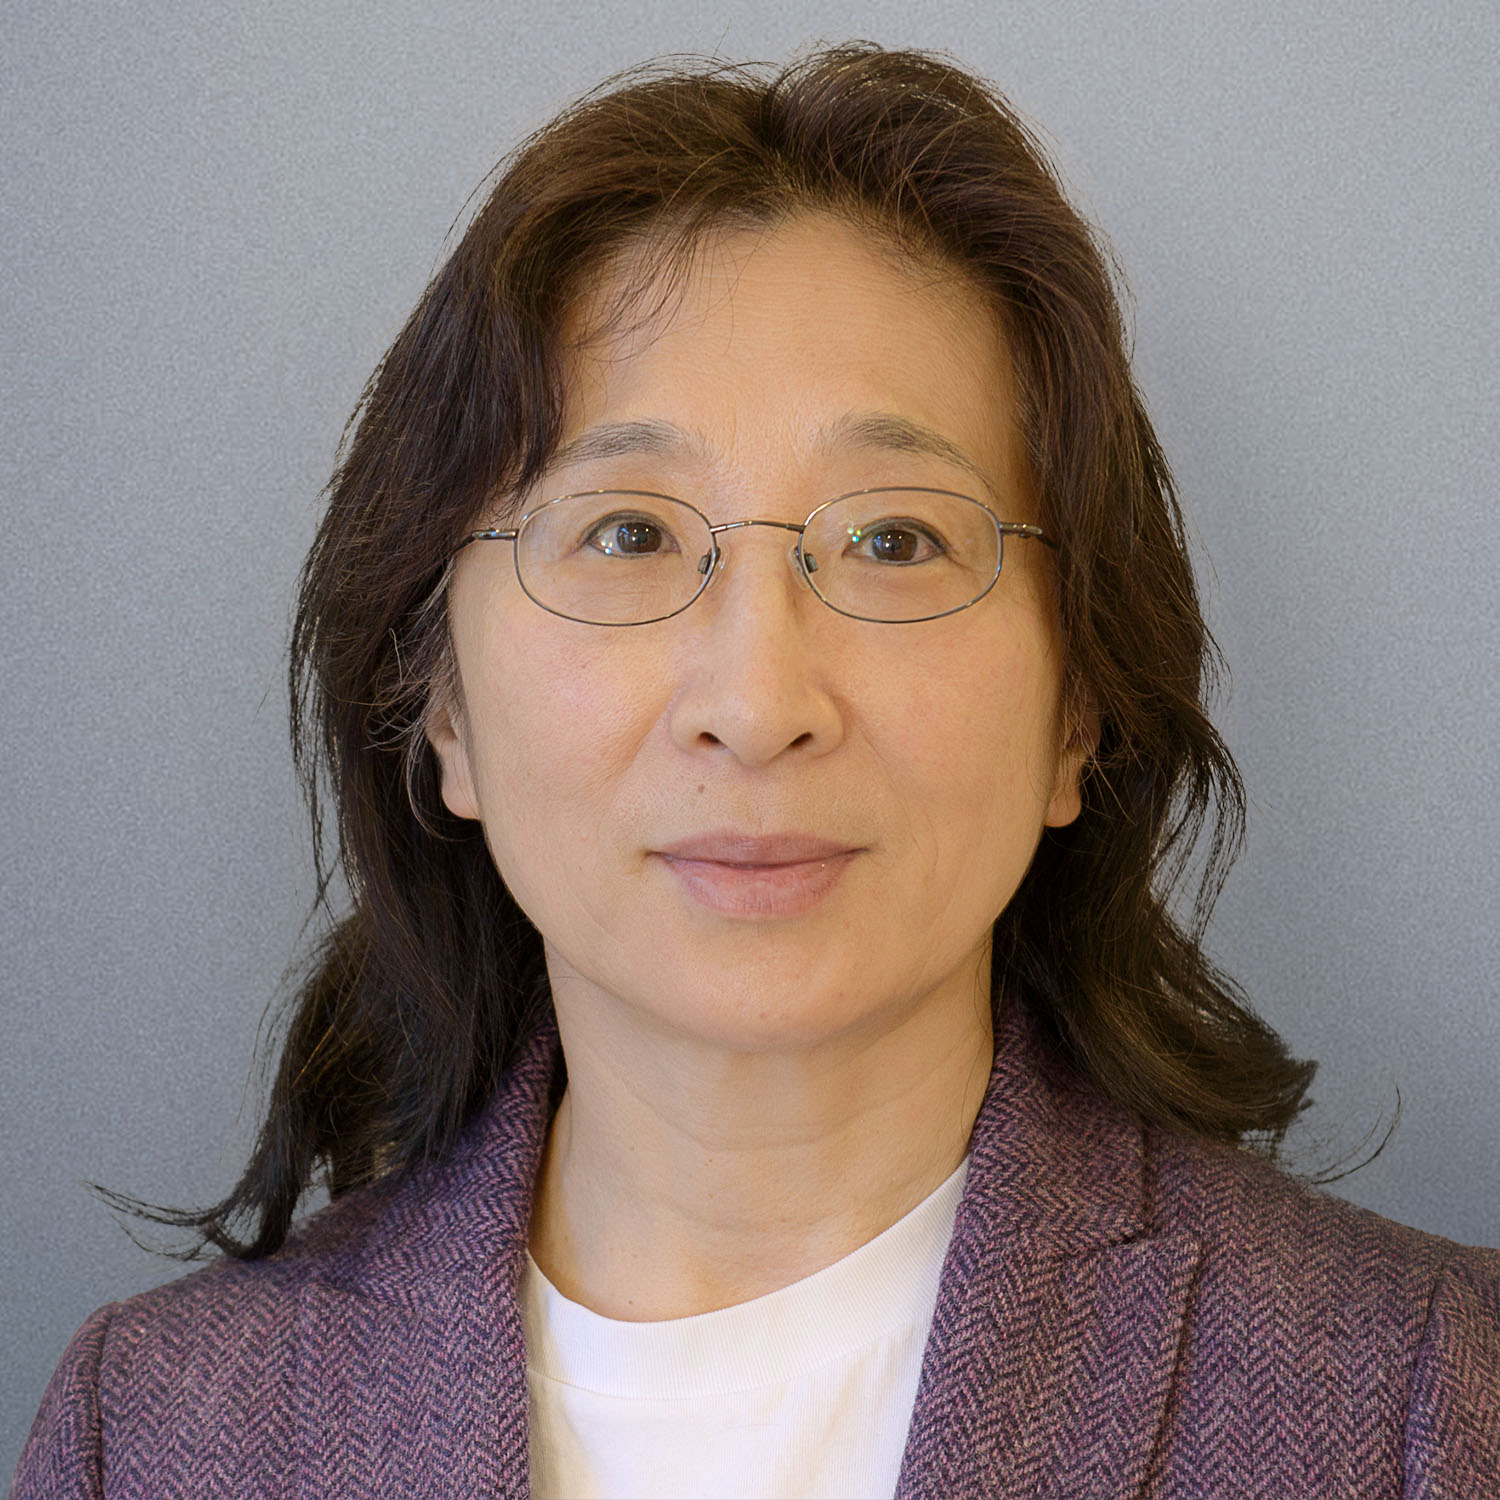 Mei Qin, M.D., Ph.D., Scientific Review Officer, Office of Scientific Review, Division of Extramural Activities